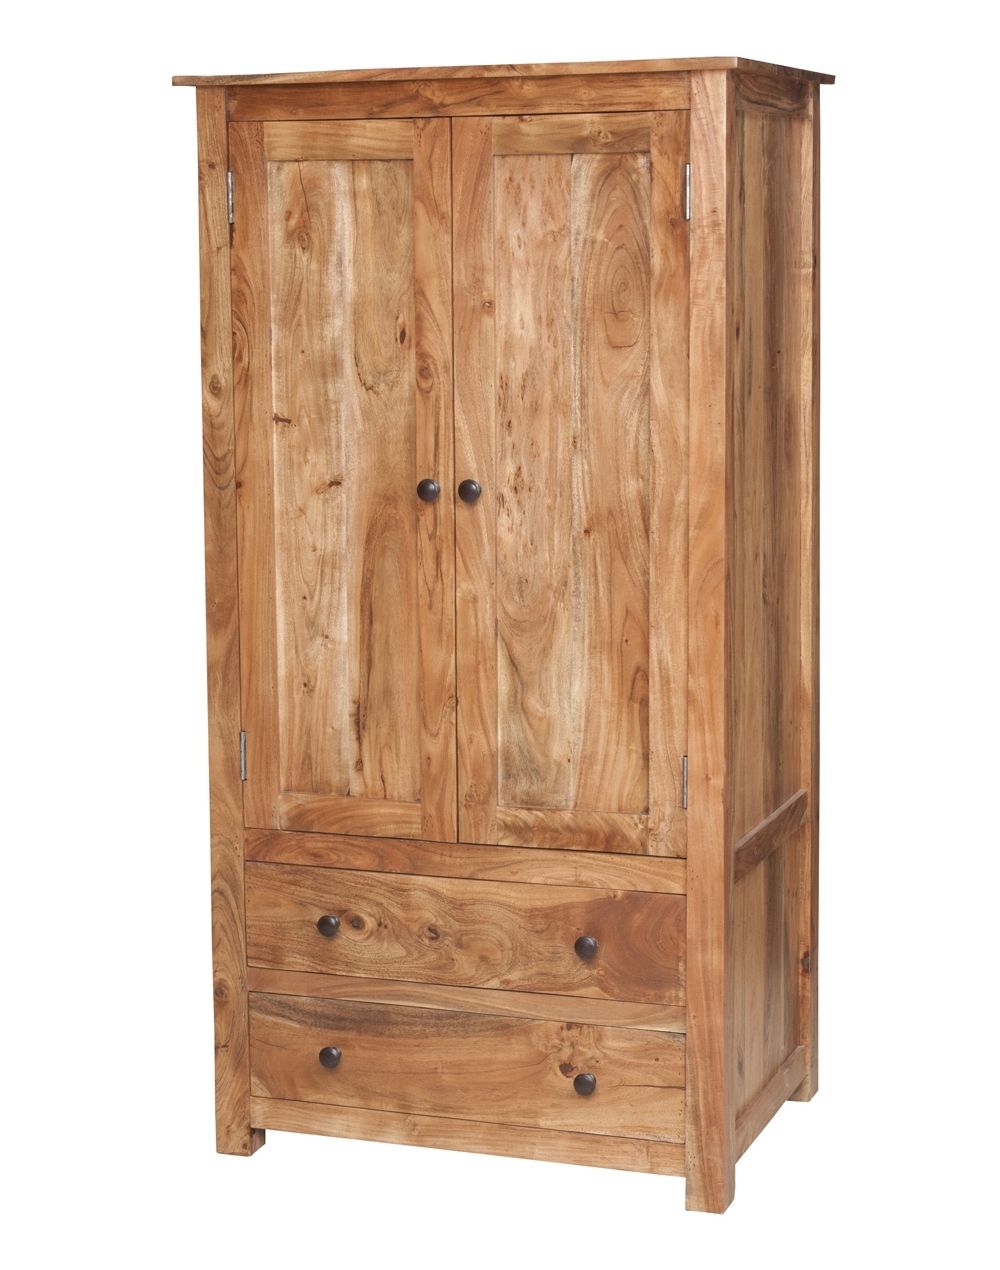 Newest Cheap Wooden Wardrobes Regarding Buy Solid Wooden Wardrobes Online In India  Fabindia (View 10 of 15)